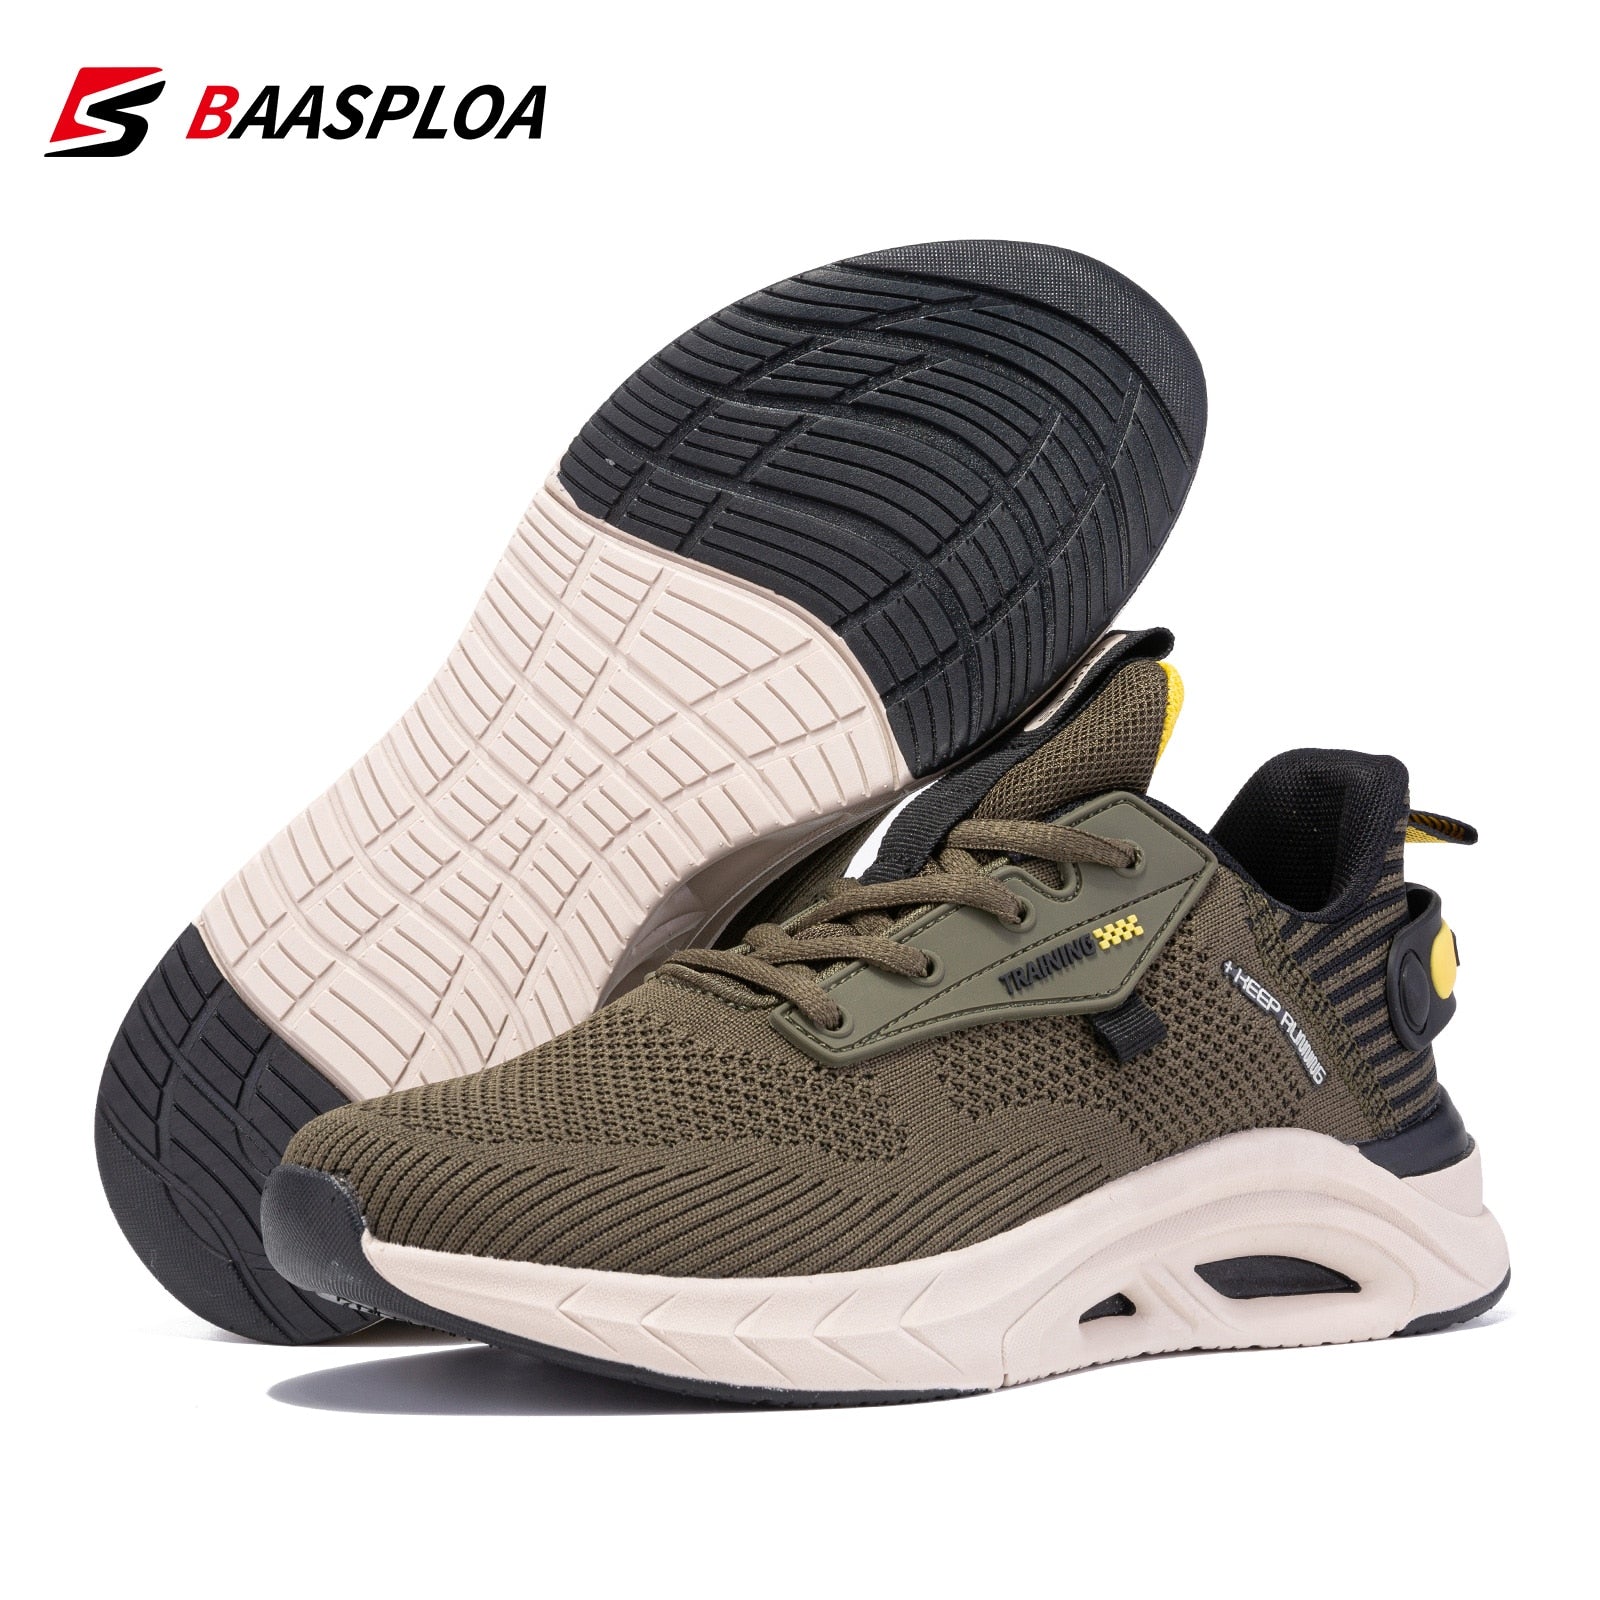 Men's Sneaker Breathable Running Shoes Casual Sneaker Original Light Shock Absorption Male Tennis Shoes The Clothing Company Sydney